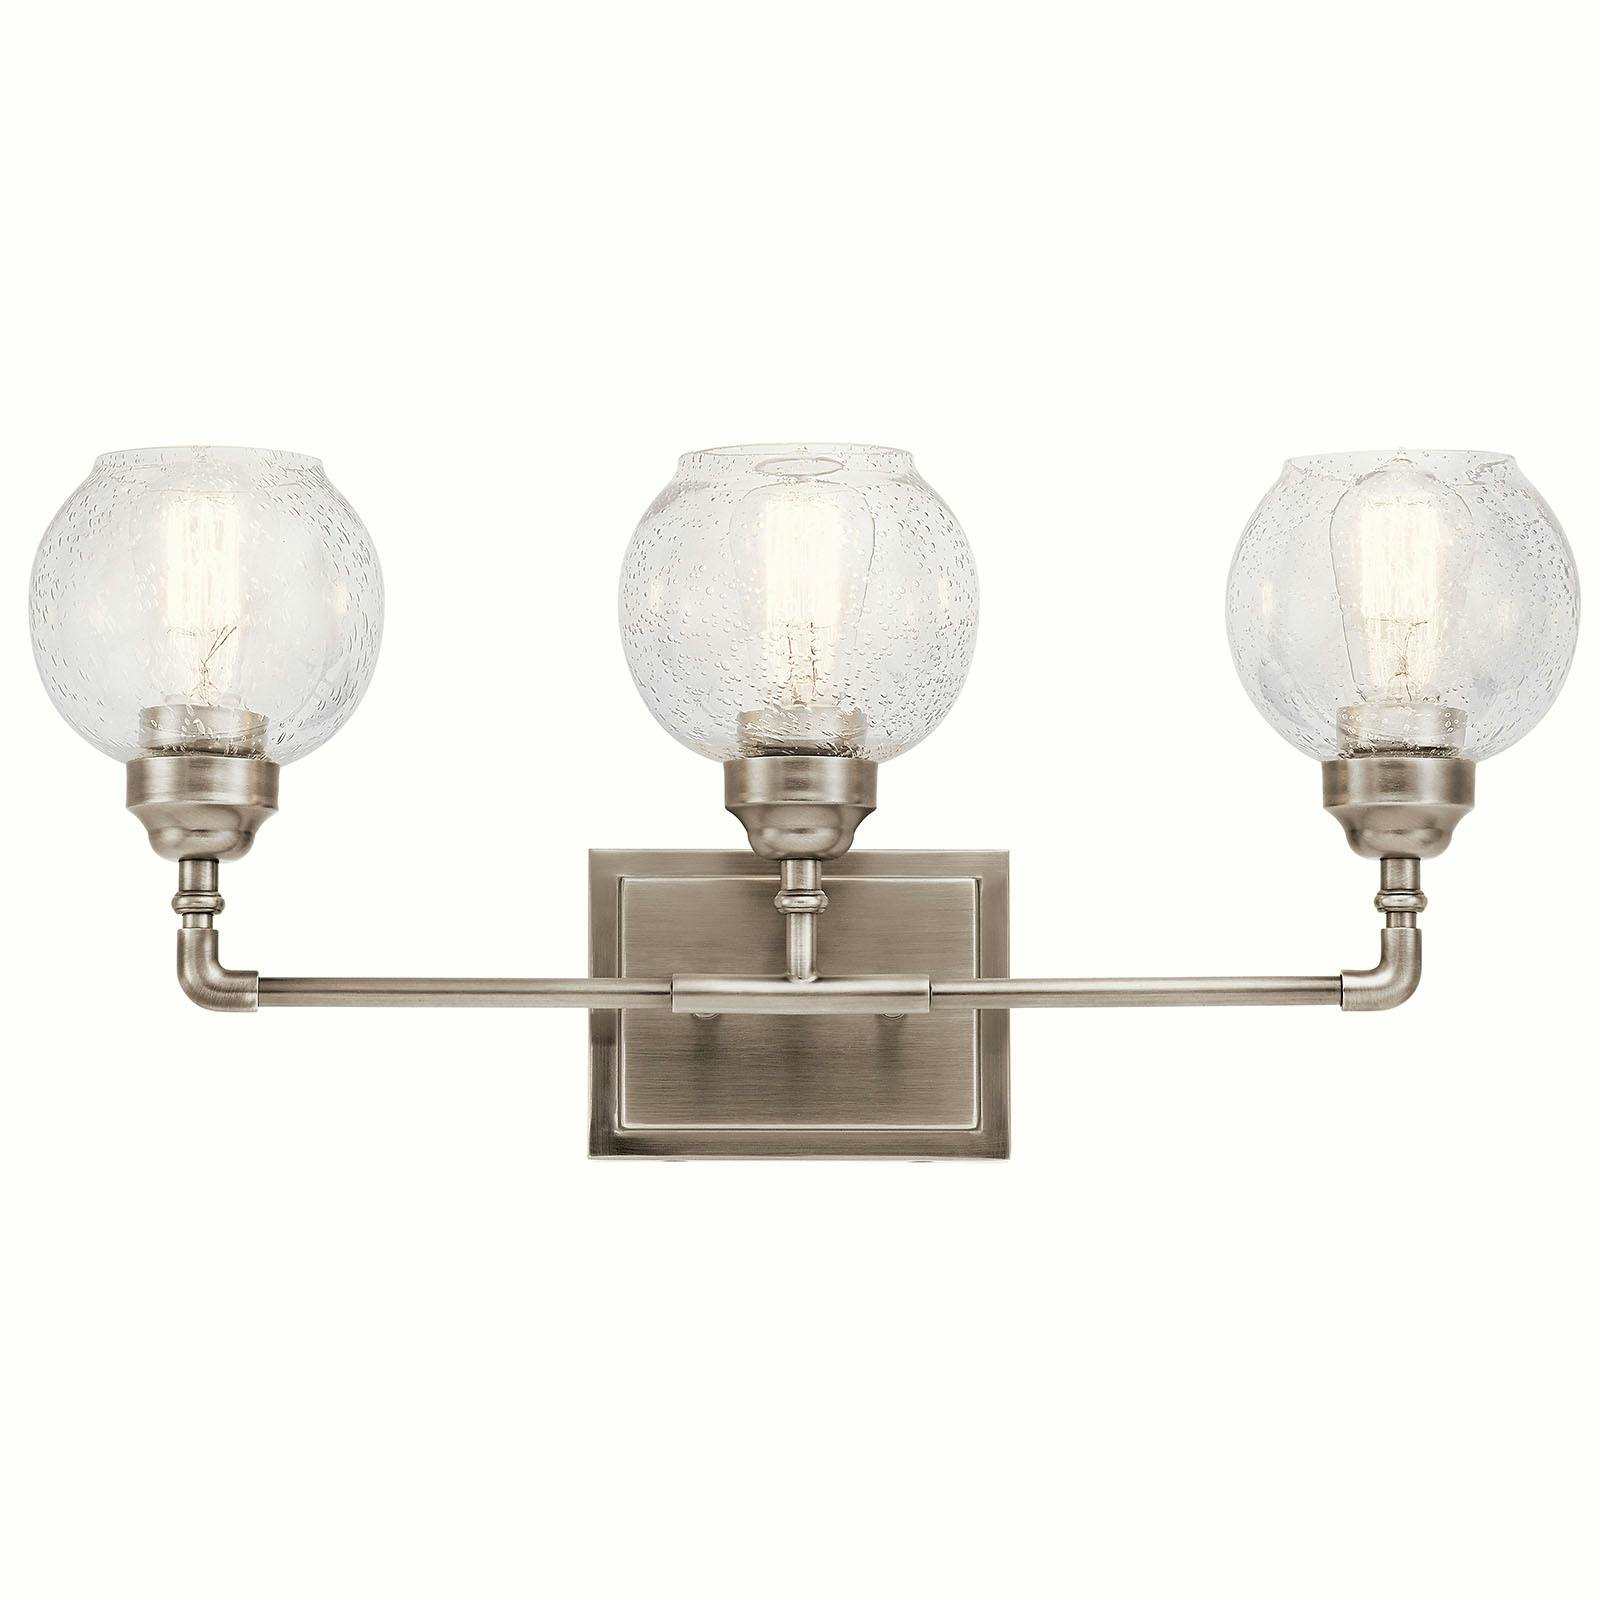 Front view of the Niles 24" 3 Light Vanity Light in Pewter on a white background